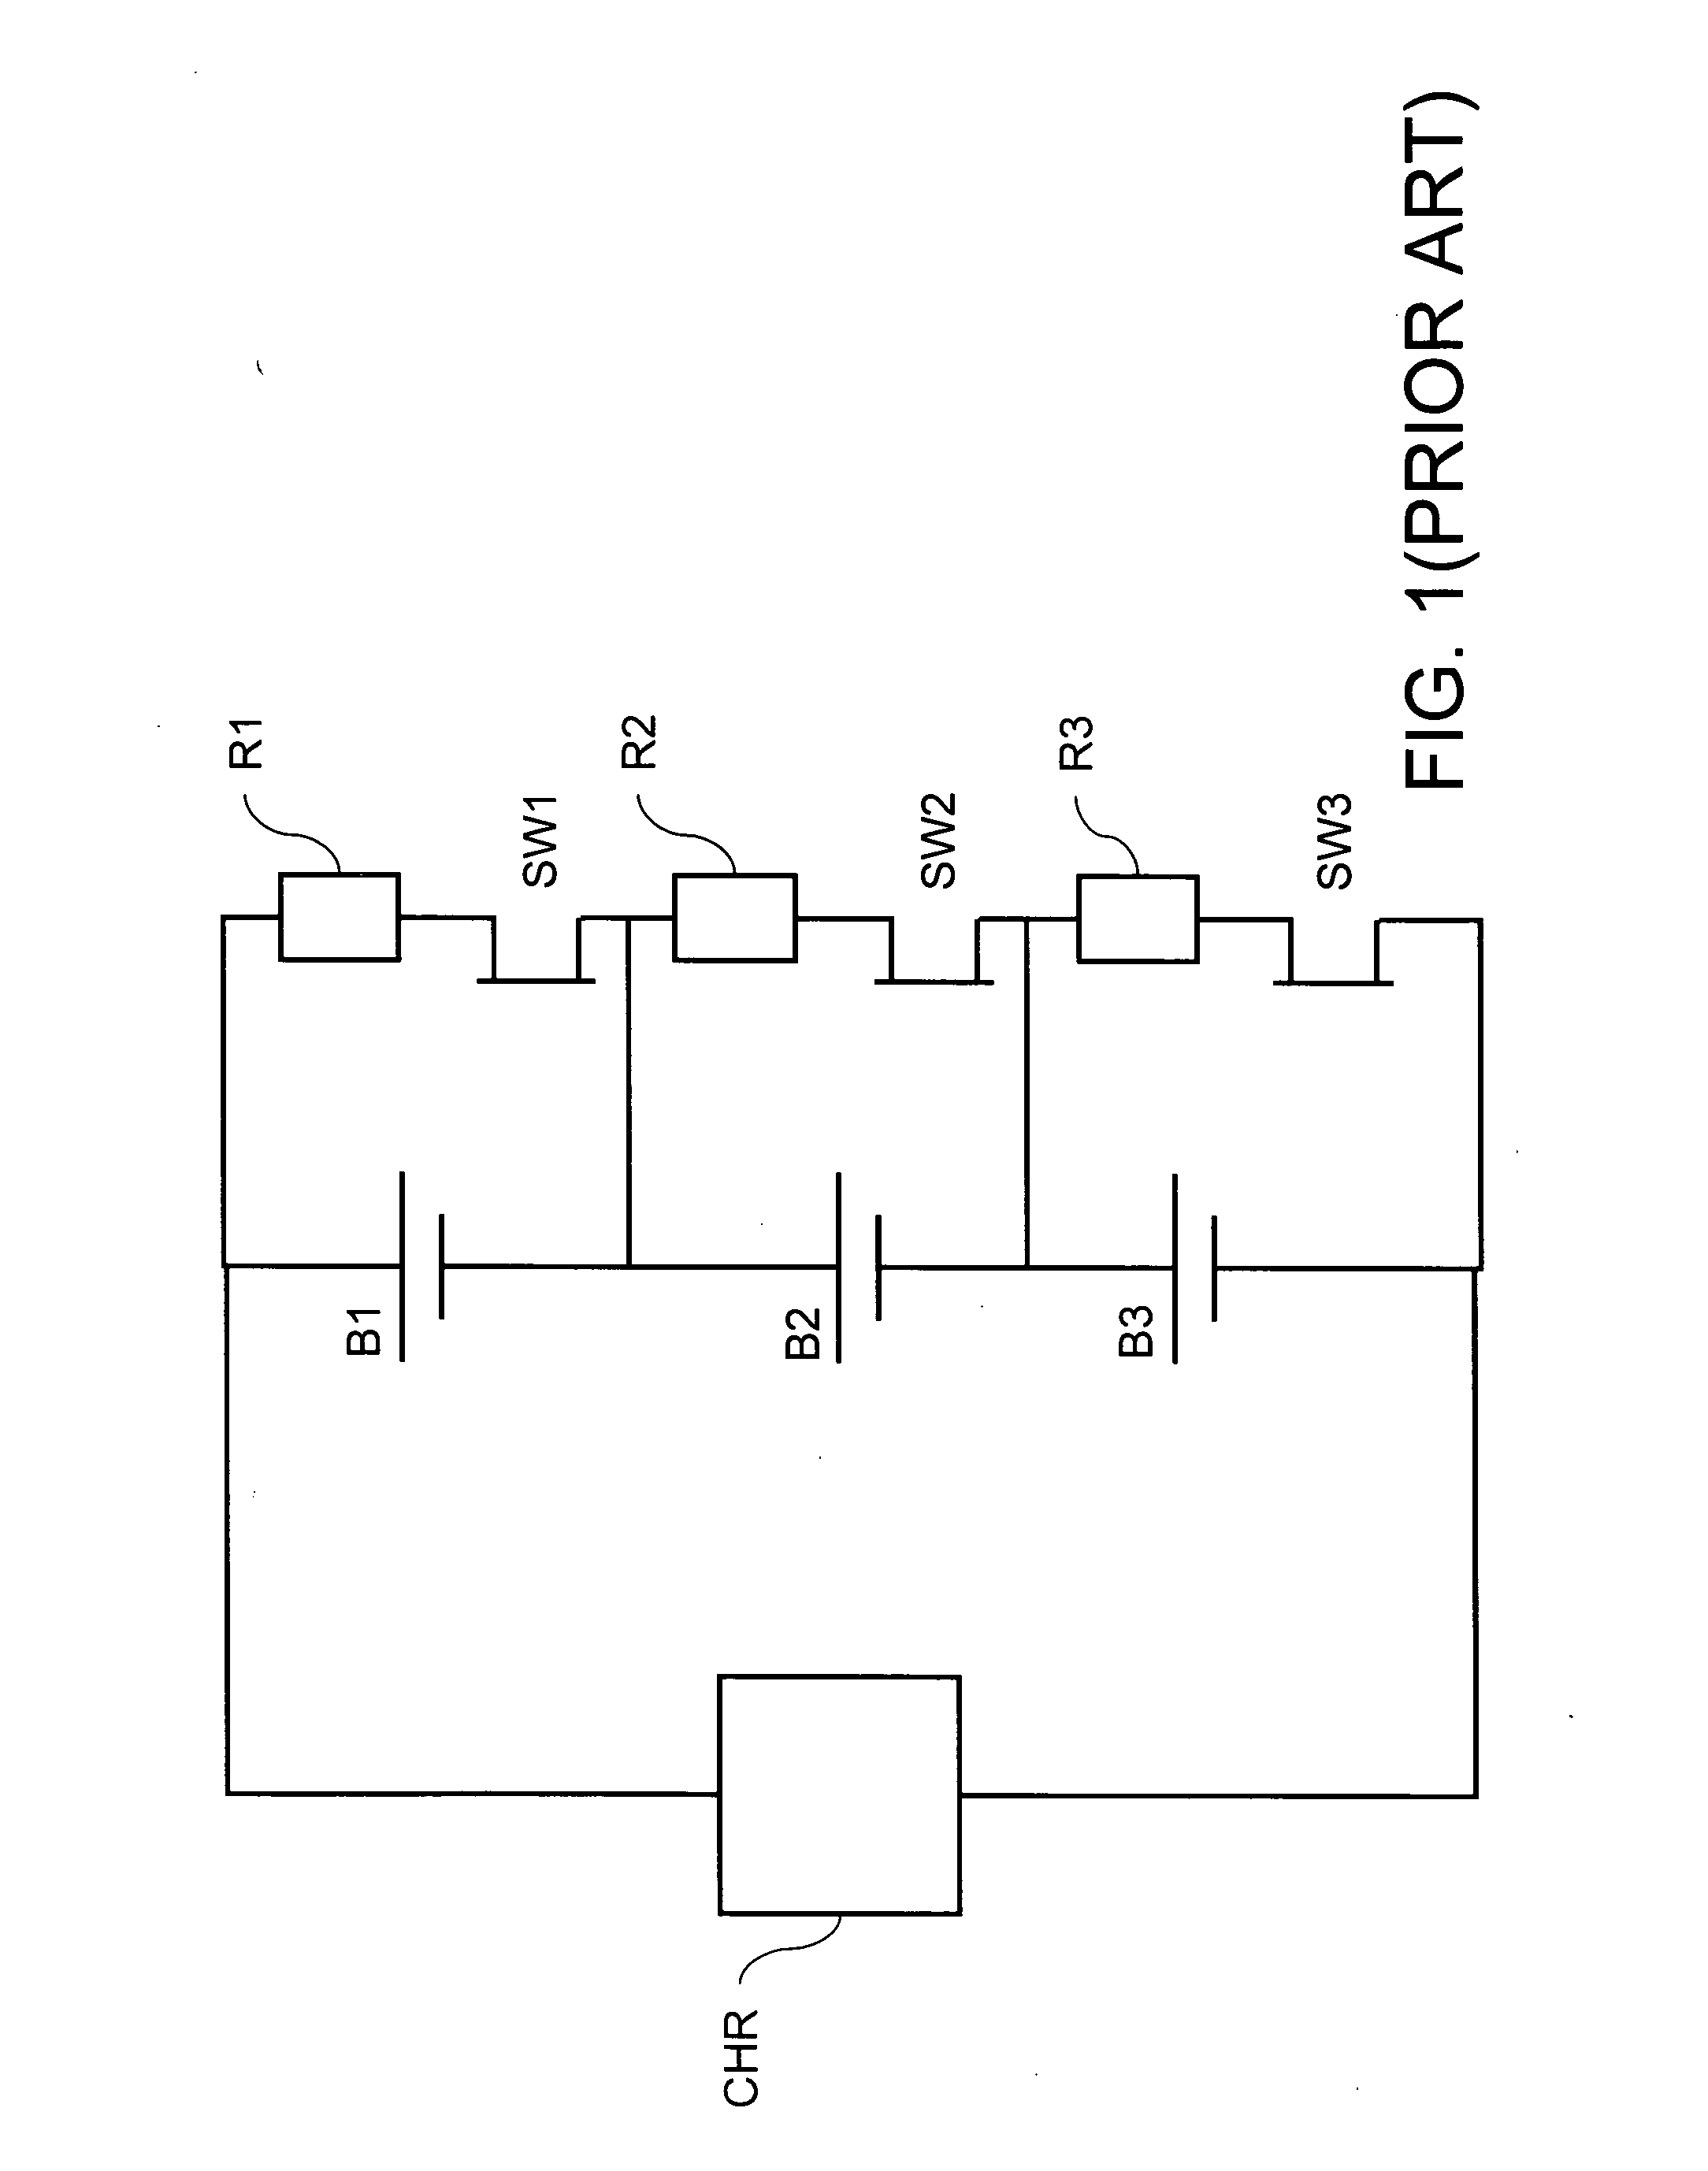 Battery energy balance circuit and battery charging bypass circuit